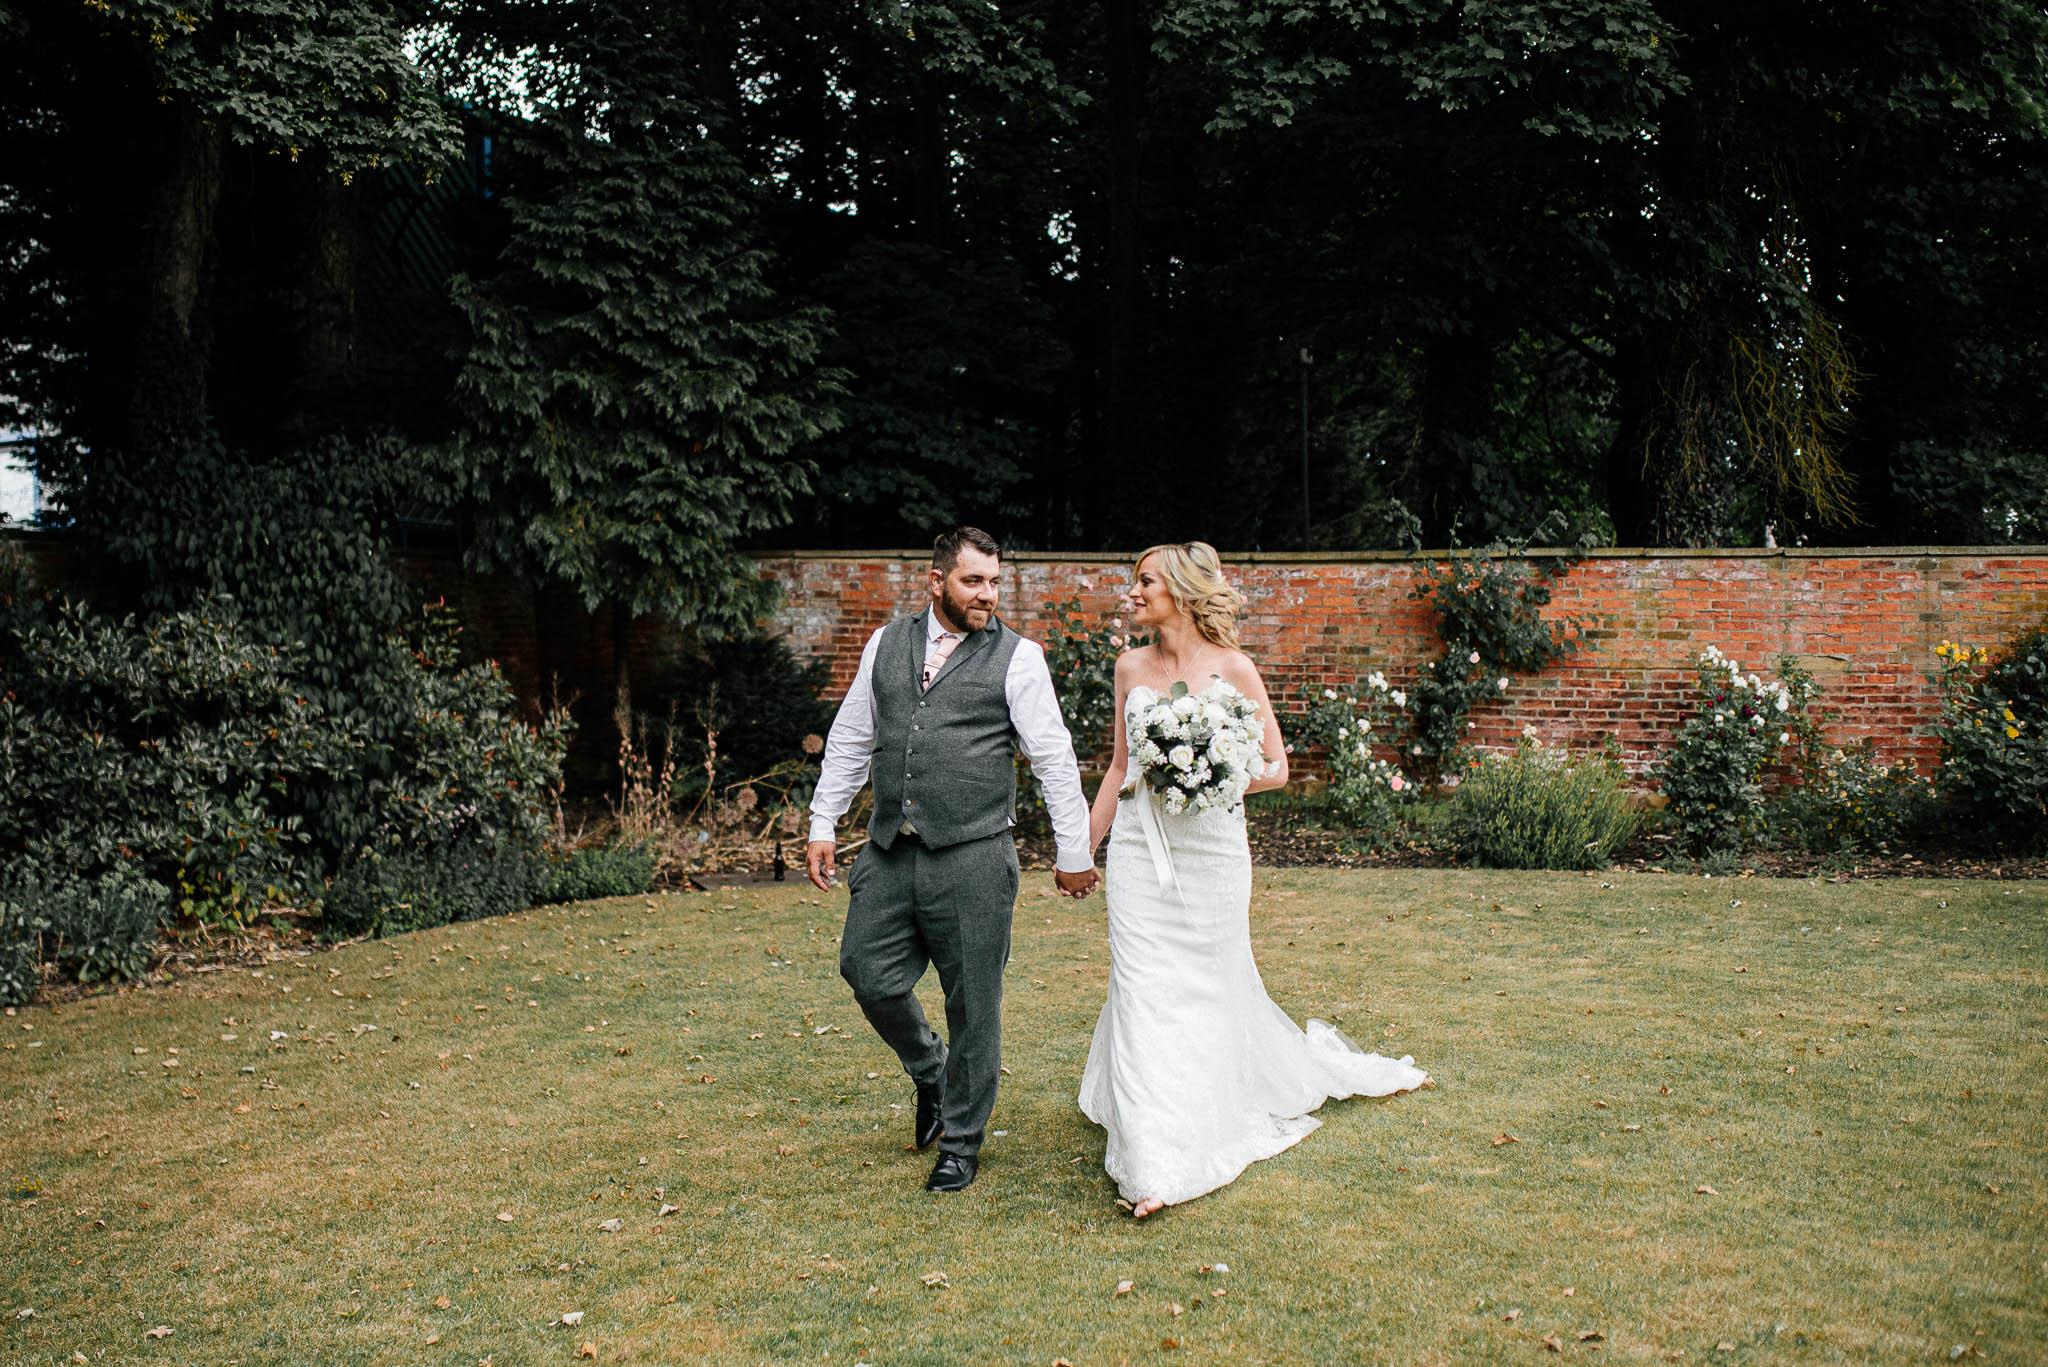 Photo of brie and groom taken at a wedding at Hellaby Hall Hotel